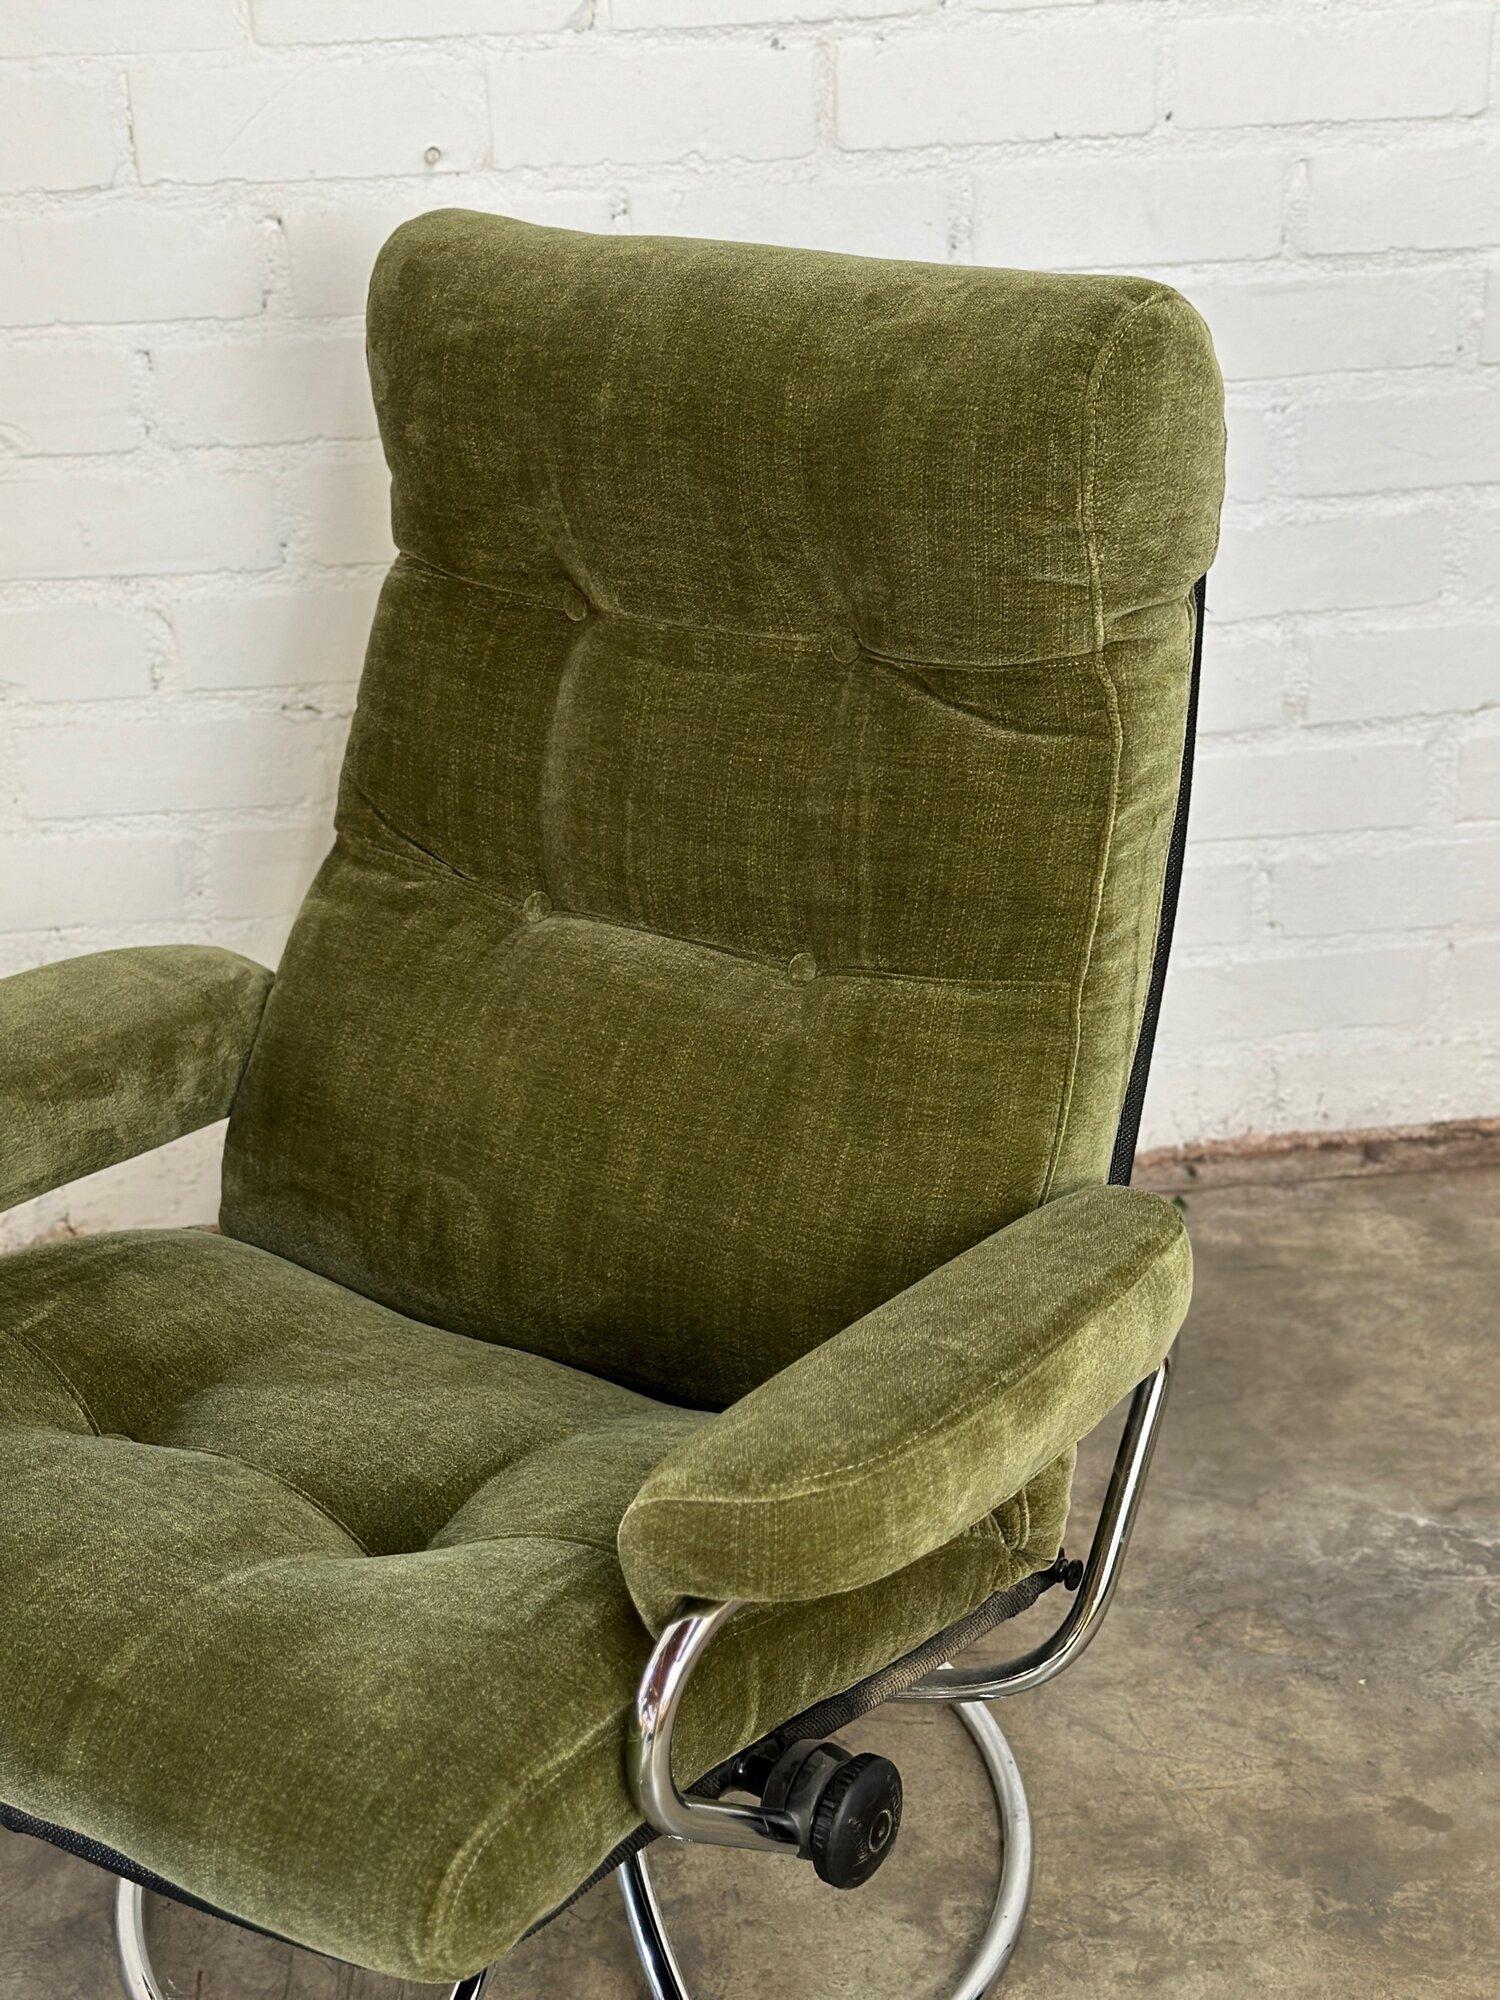 W33 D36 H38.5 SW25 SD19 SH17 AH22

Ekornes Recliner lounge chair and ottoman newly upholstered in fern green chenille. Set is fully functional and sturdy. 